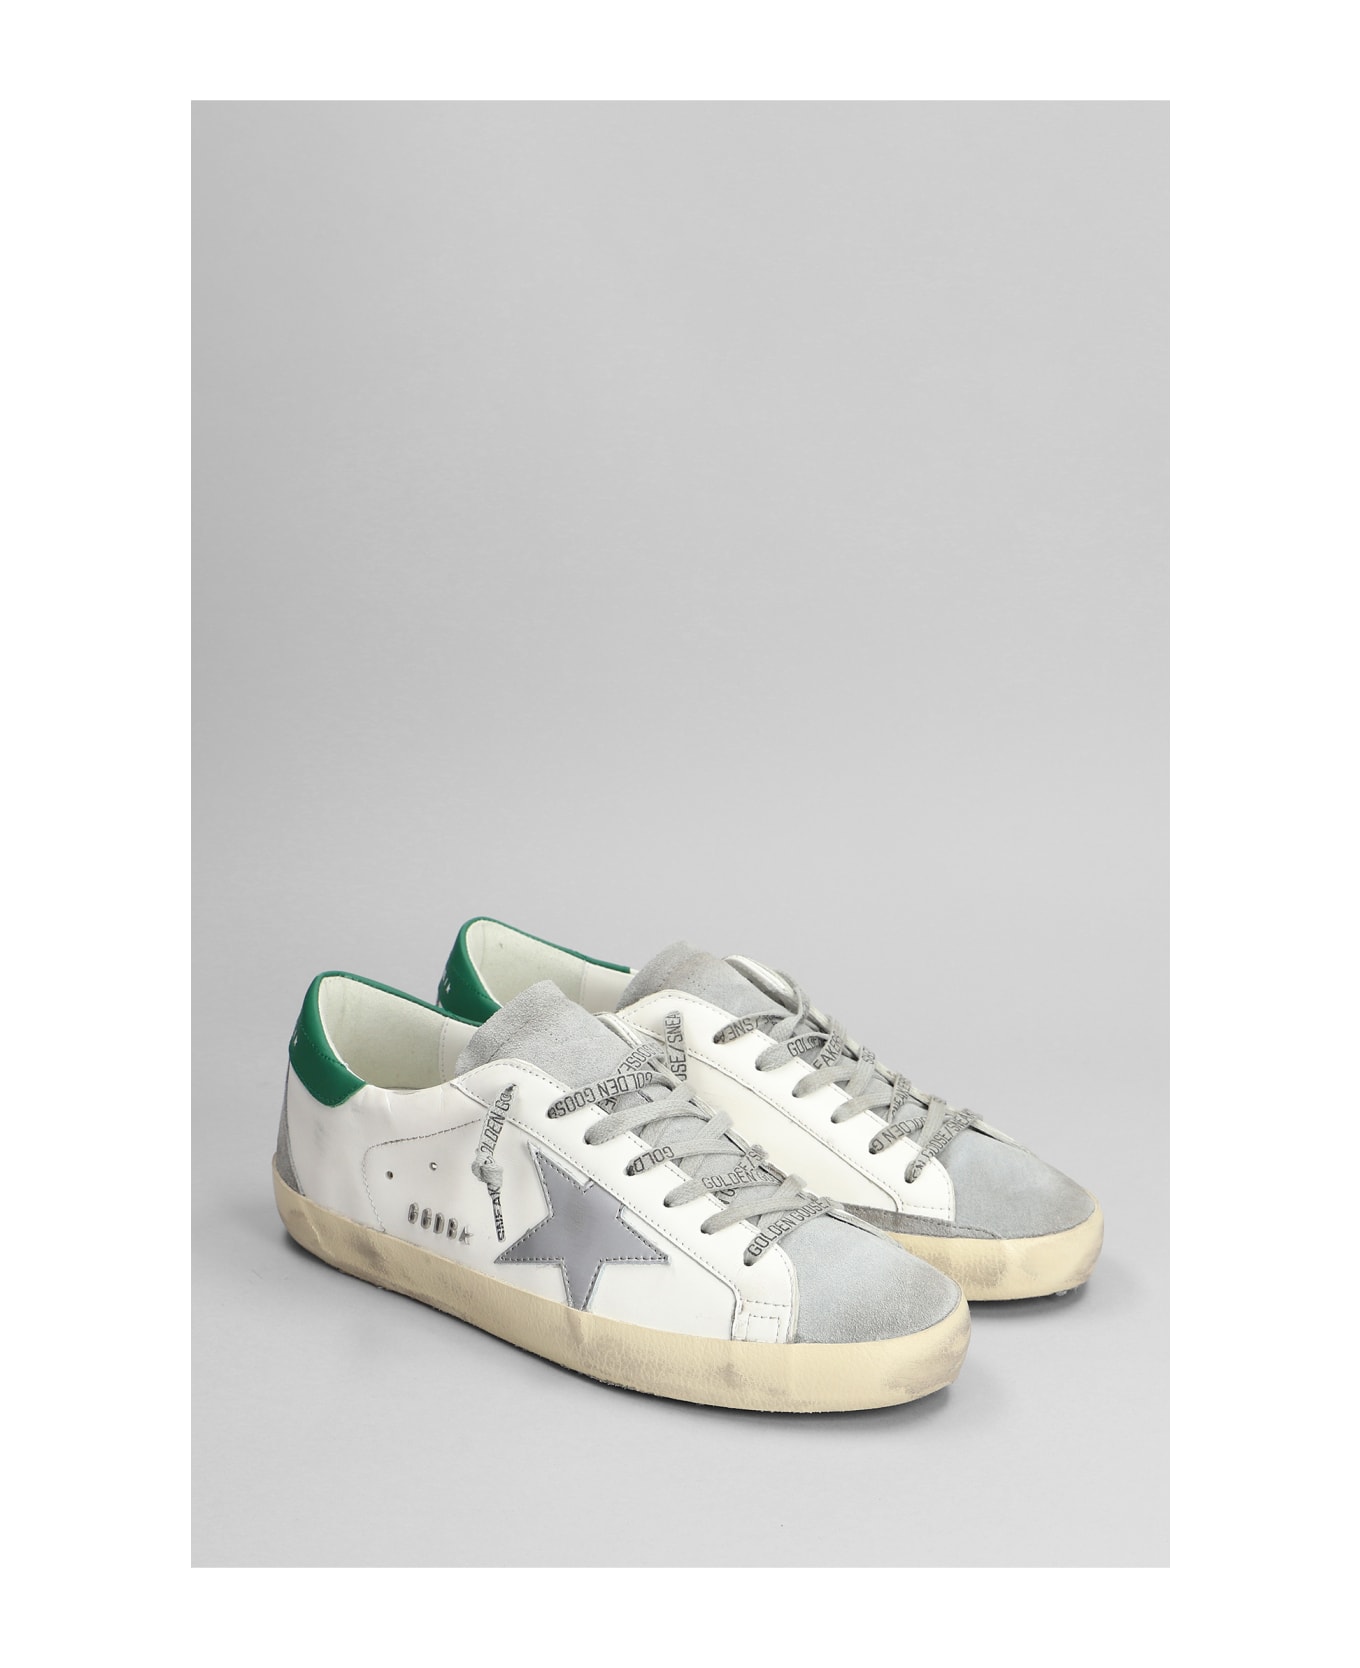 Golden Goose Superstar Sneakers In White Suede And Leather - white スニーカー